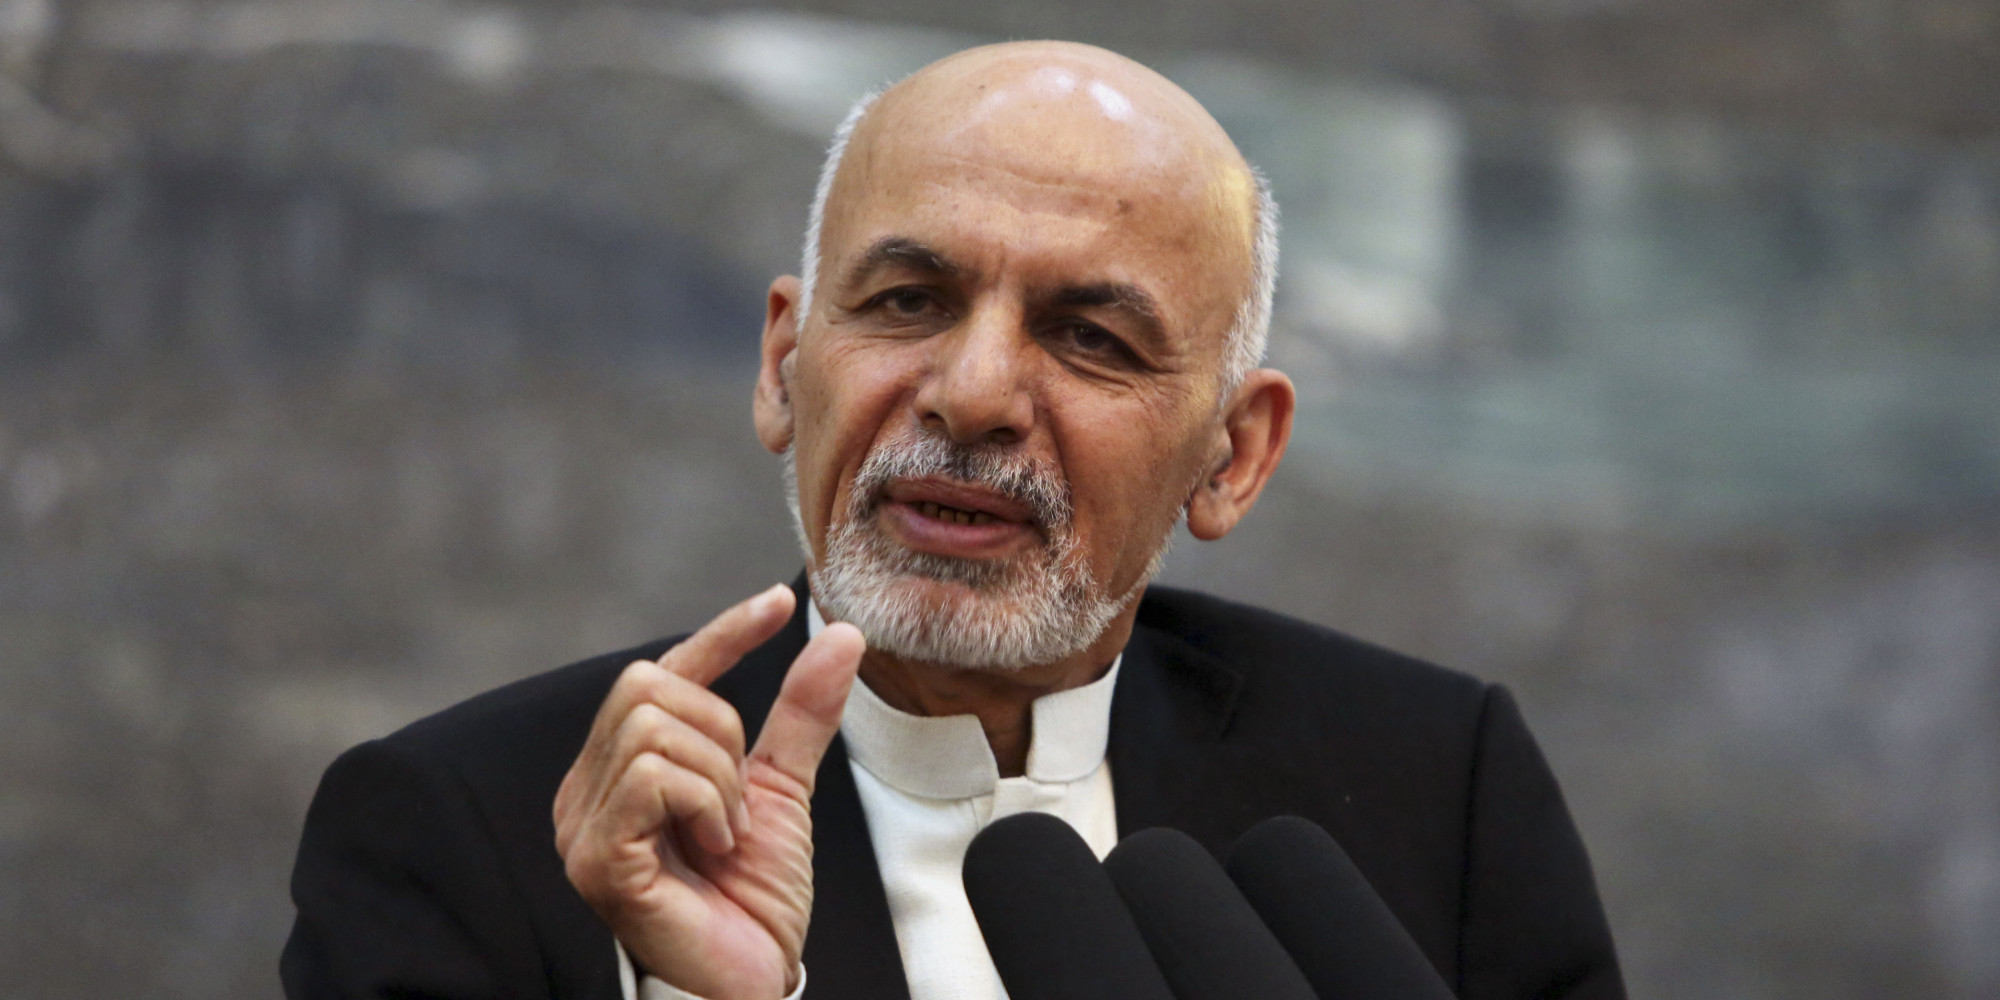 Afghanistan's President Ashraf Ghani Ahmadzai speaks during a press conference in Kabul, Afghanistan, Saturday, Nov. 1, 2014. Ghani Ahmadzai vowed that his crackdown on official corruption will ensure there is no repeat of a banking scandal in which almost $1 billion was embezzled, decimating confidence in the country's financial sector. (AP Photo/Rahmat Gul)